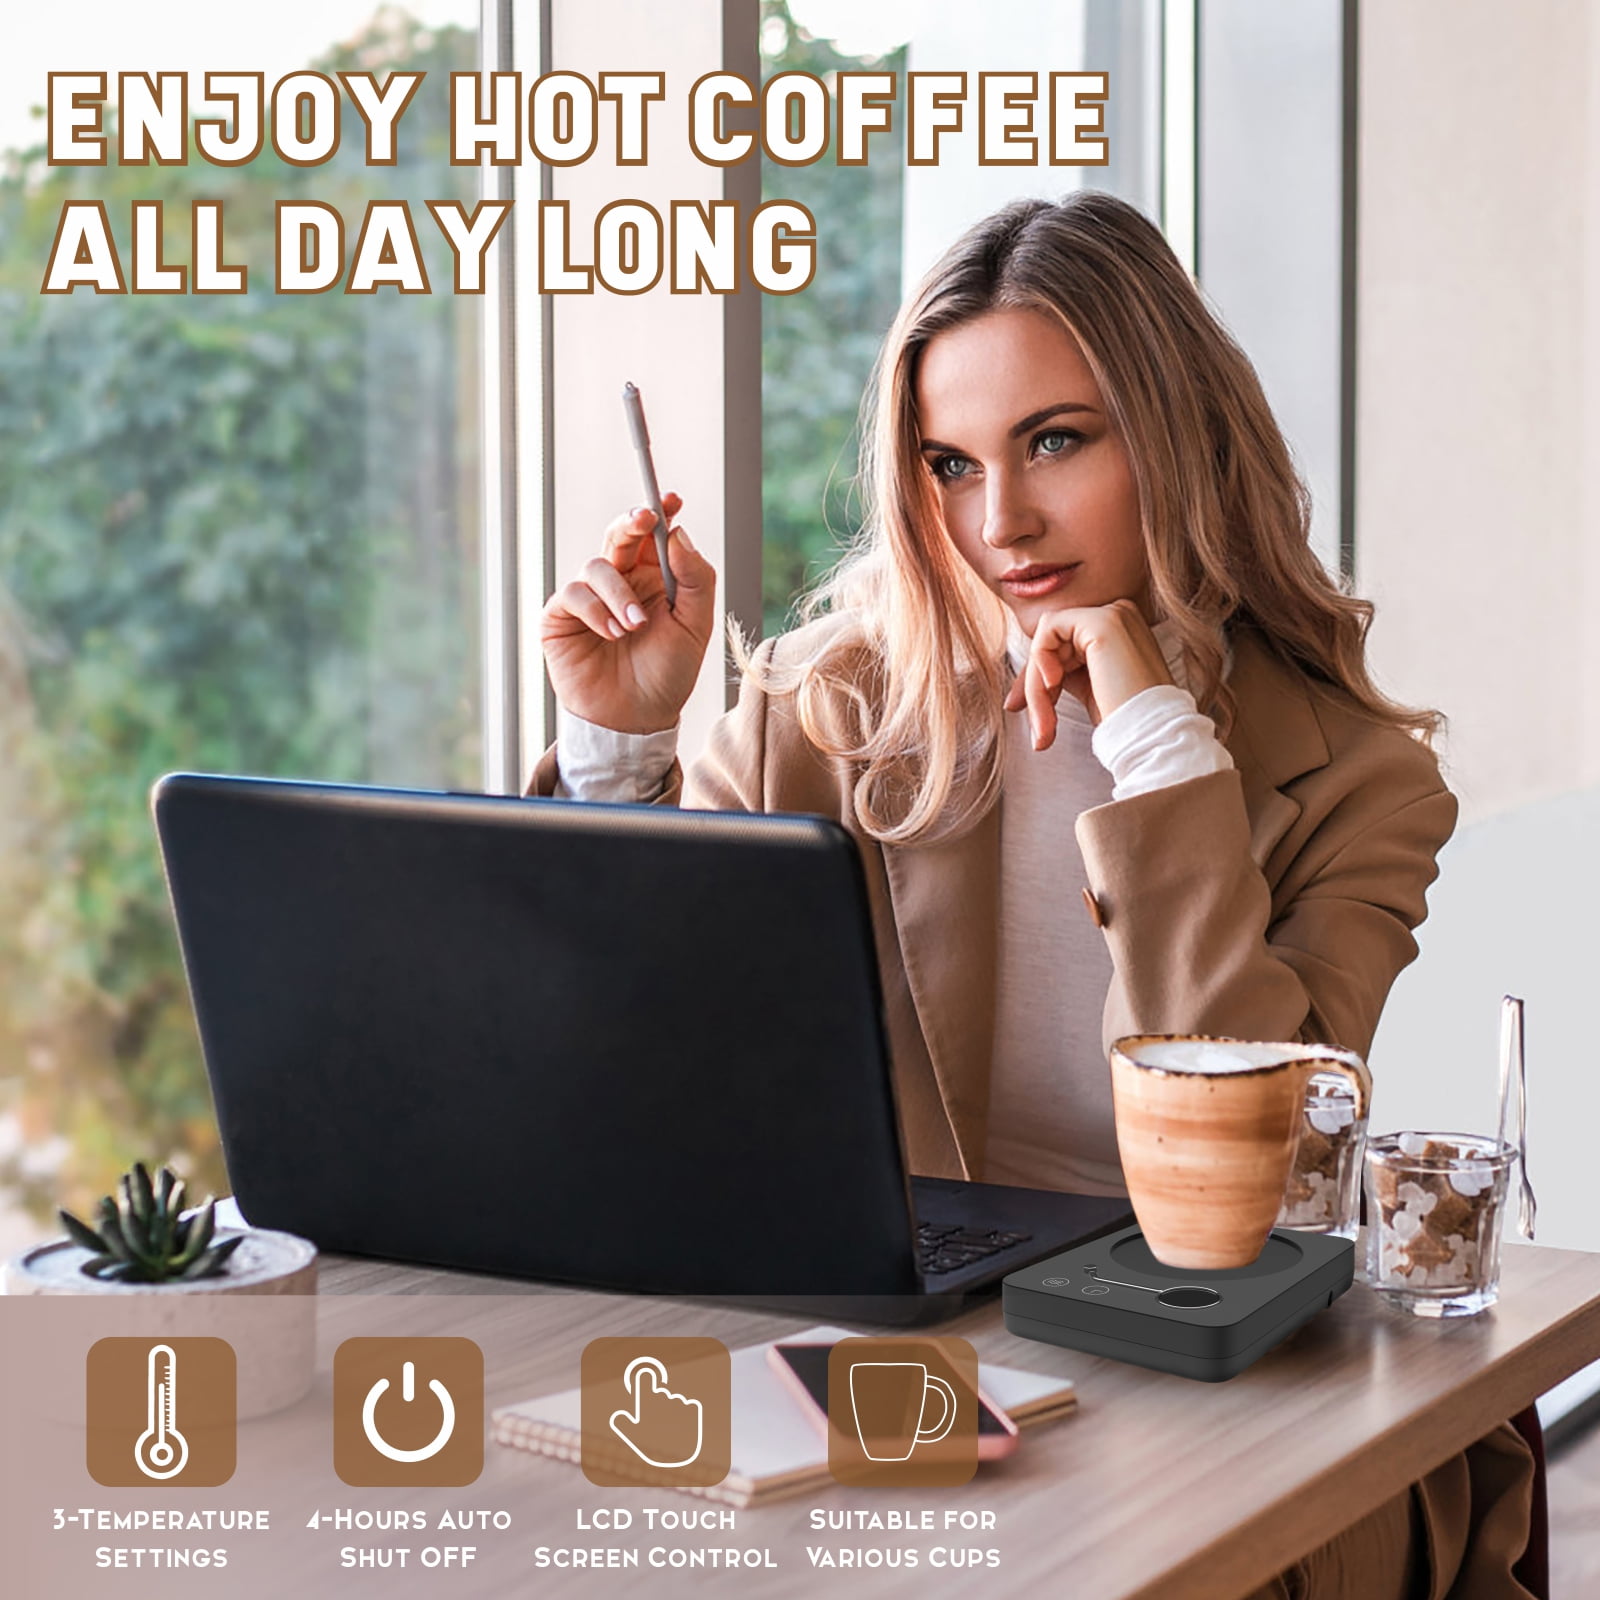 Coffee Mug Warmer，Electric Cup Warmer, Candle Warmer with 8H Auto Shut Off,  3 Temperature Setting 3 Timer with USB Charge for Home Desk Office Use 